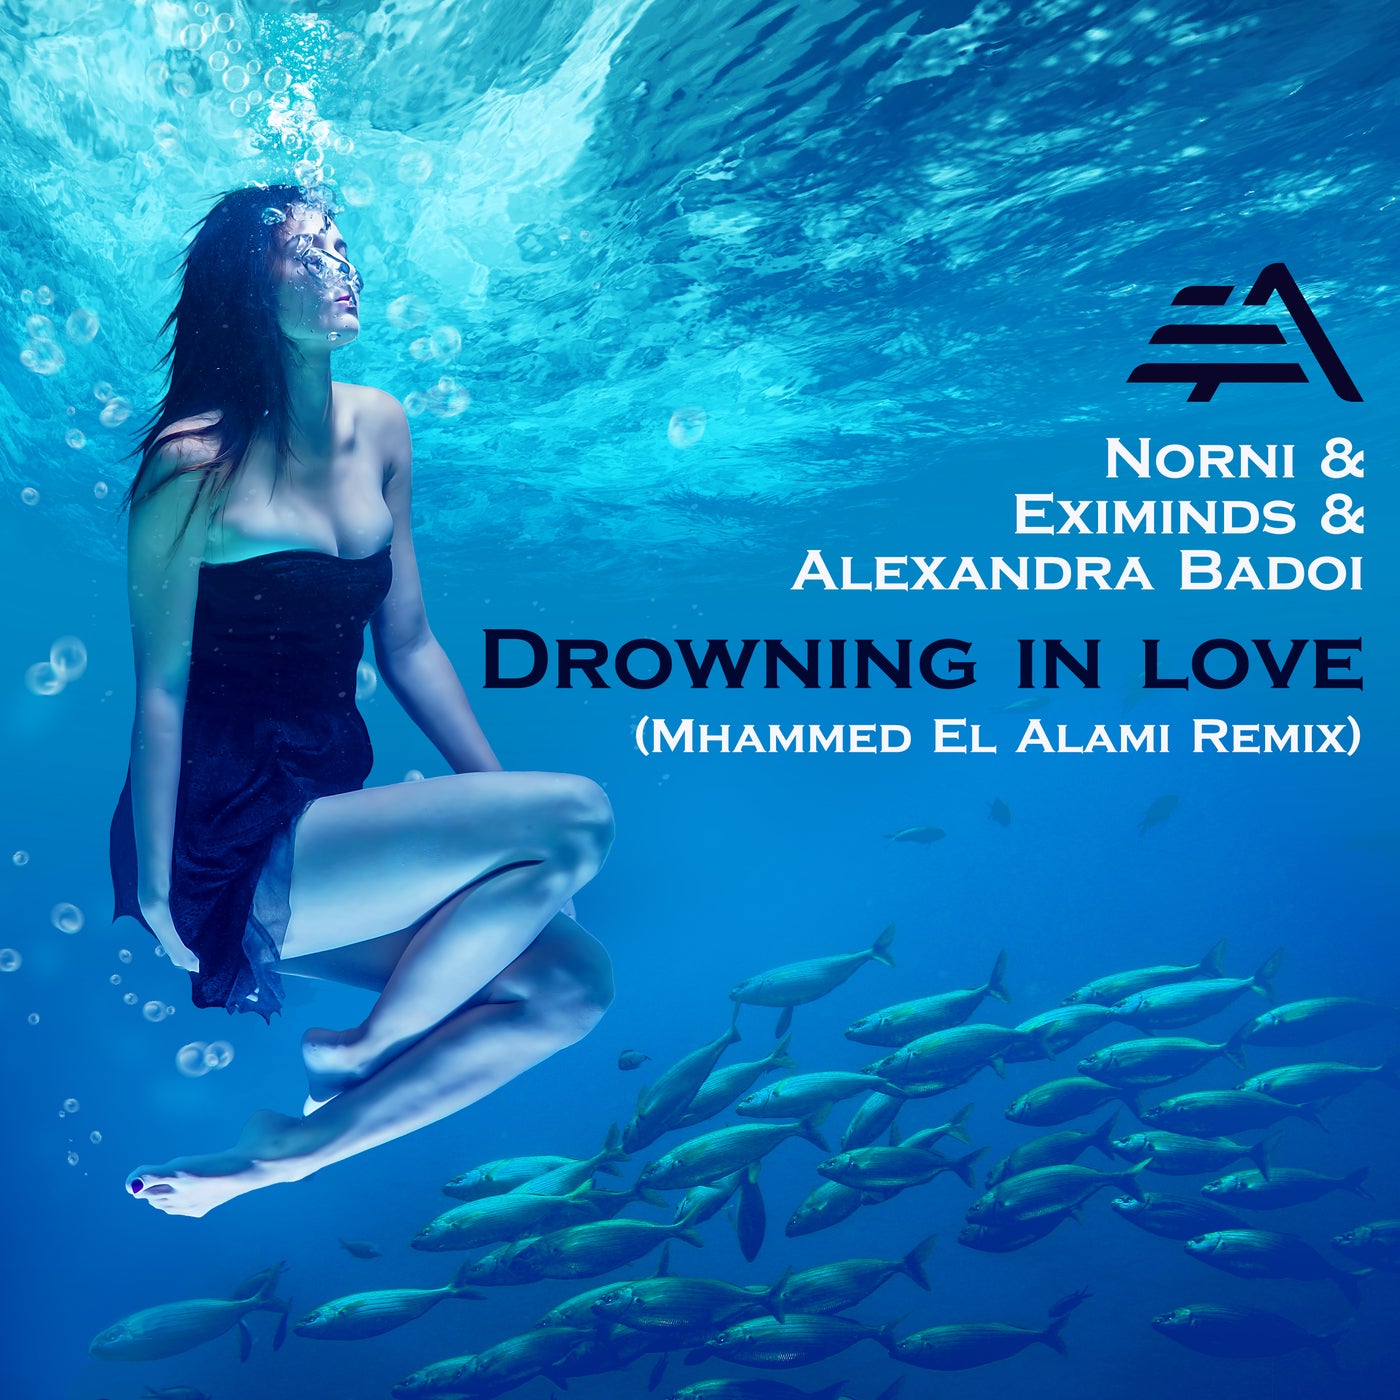 Drowning in love (Mhammed El Alami Remix)